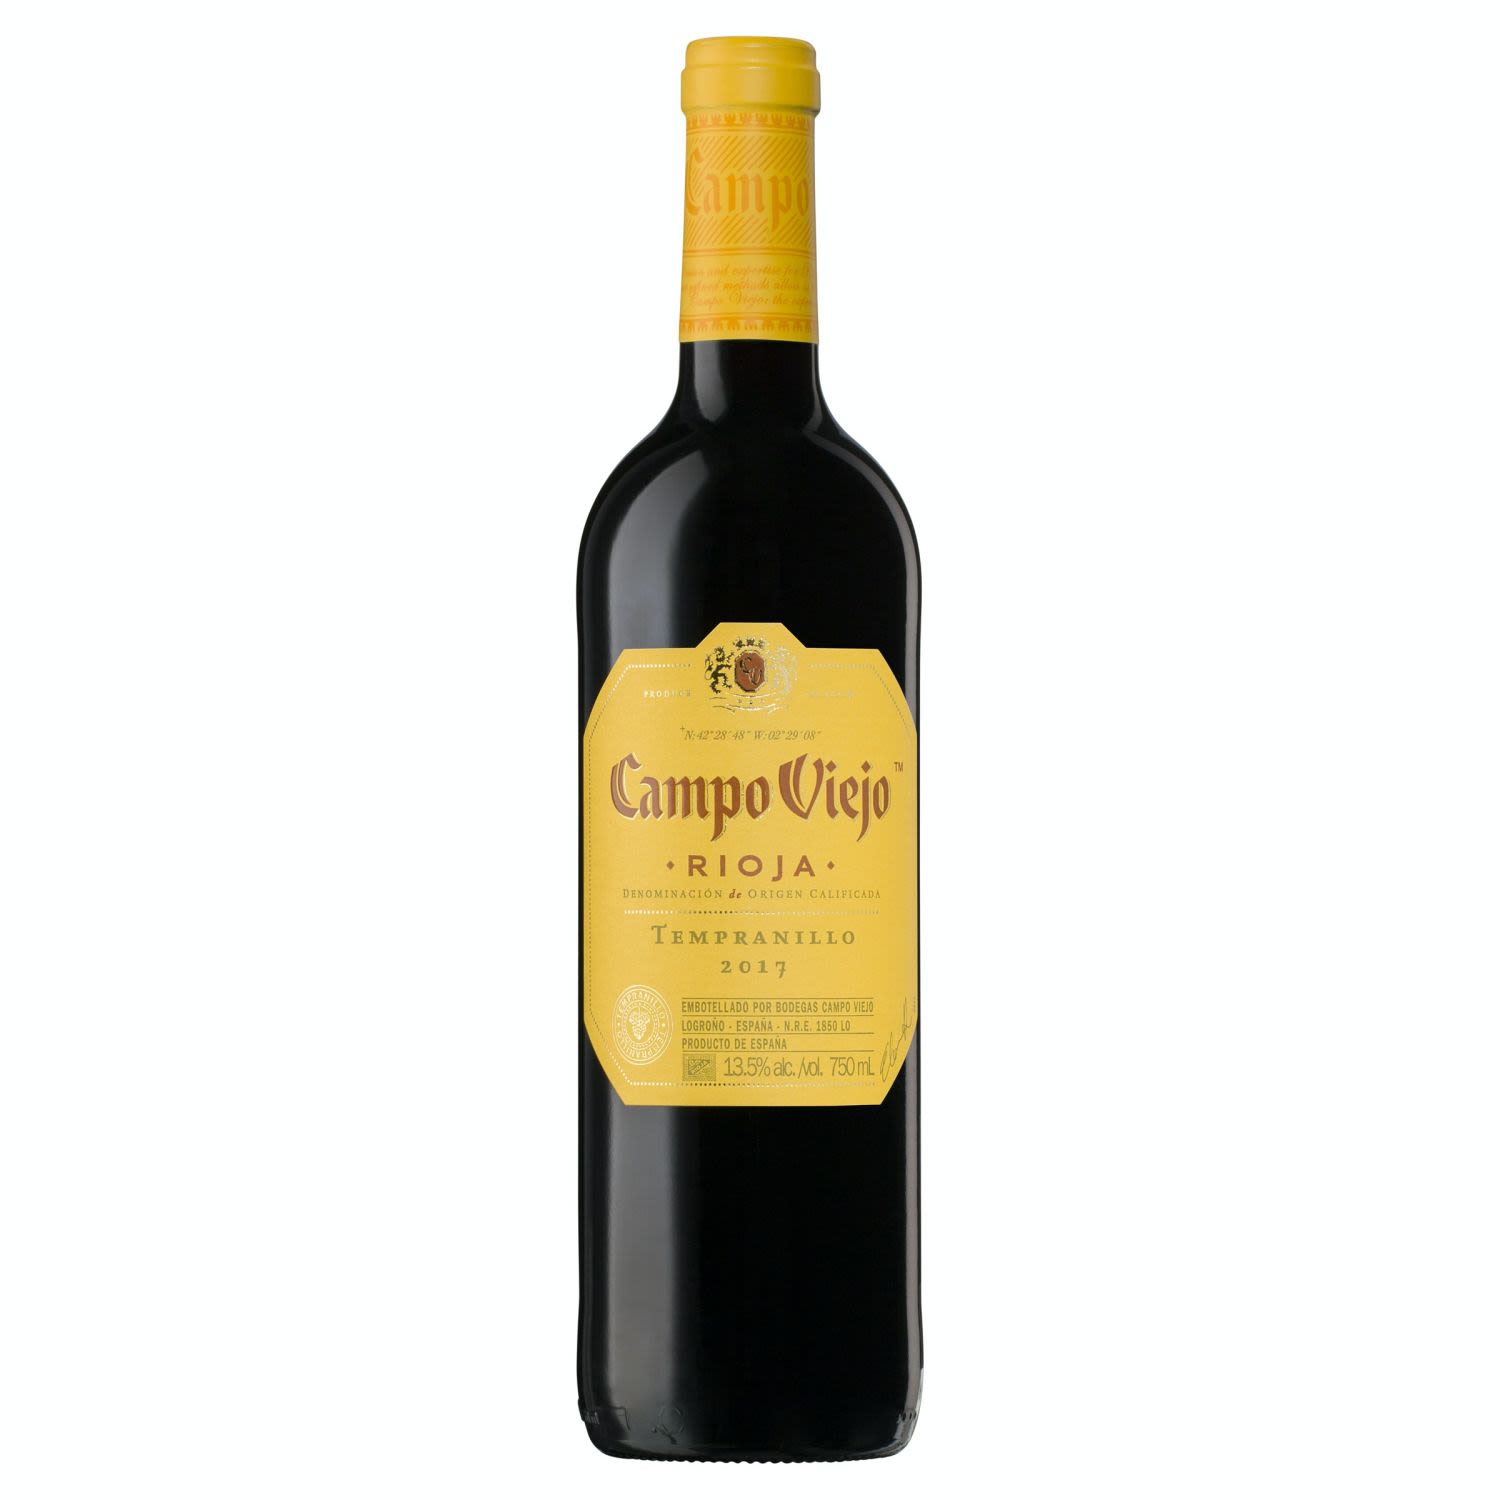 Crafted from 100% premium Tempranillo and a passionate winemaking philosophy. The result is a fresh and lively fruit expression of the variety, that is undeniably Campo Viejo.<br /> <br />Alcohol Volume: 13.50%<br /><br />Pack Format: Bottle<br /><br />Standard Drinks: 8<br /><br />Pack Type: Bottle<br /><br />Country of Origin: Spain<br /><br />Region: Rioja<br /><br />Vintage: Vintages Vary<br />